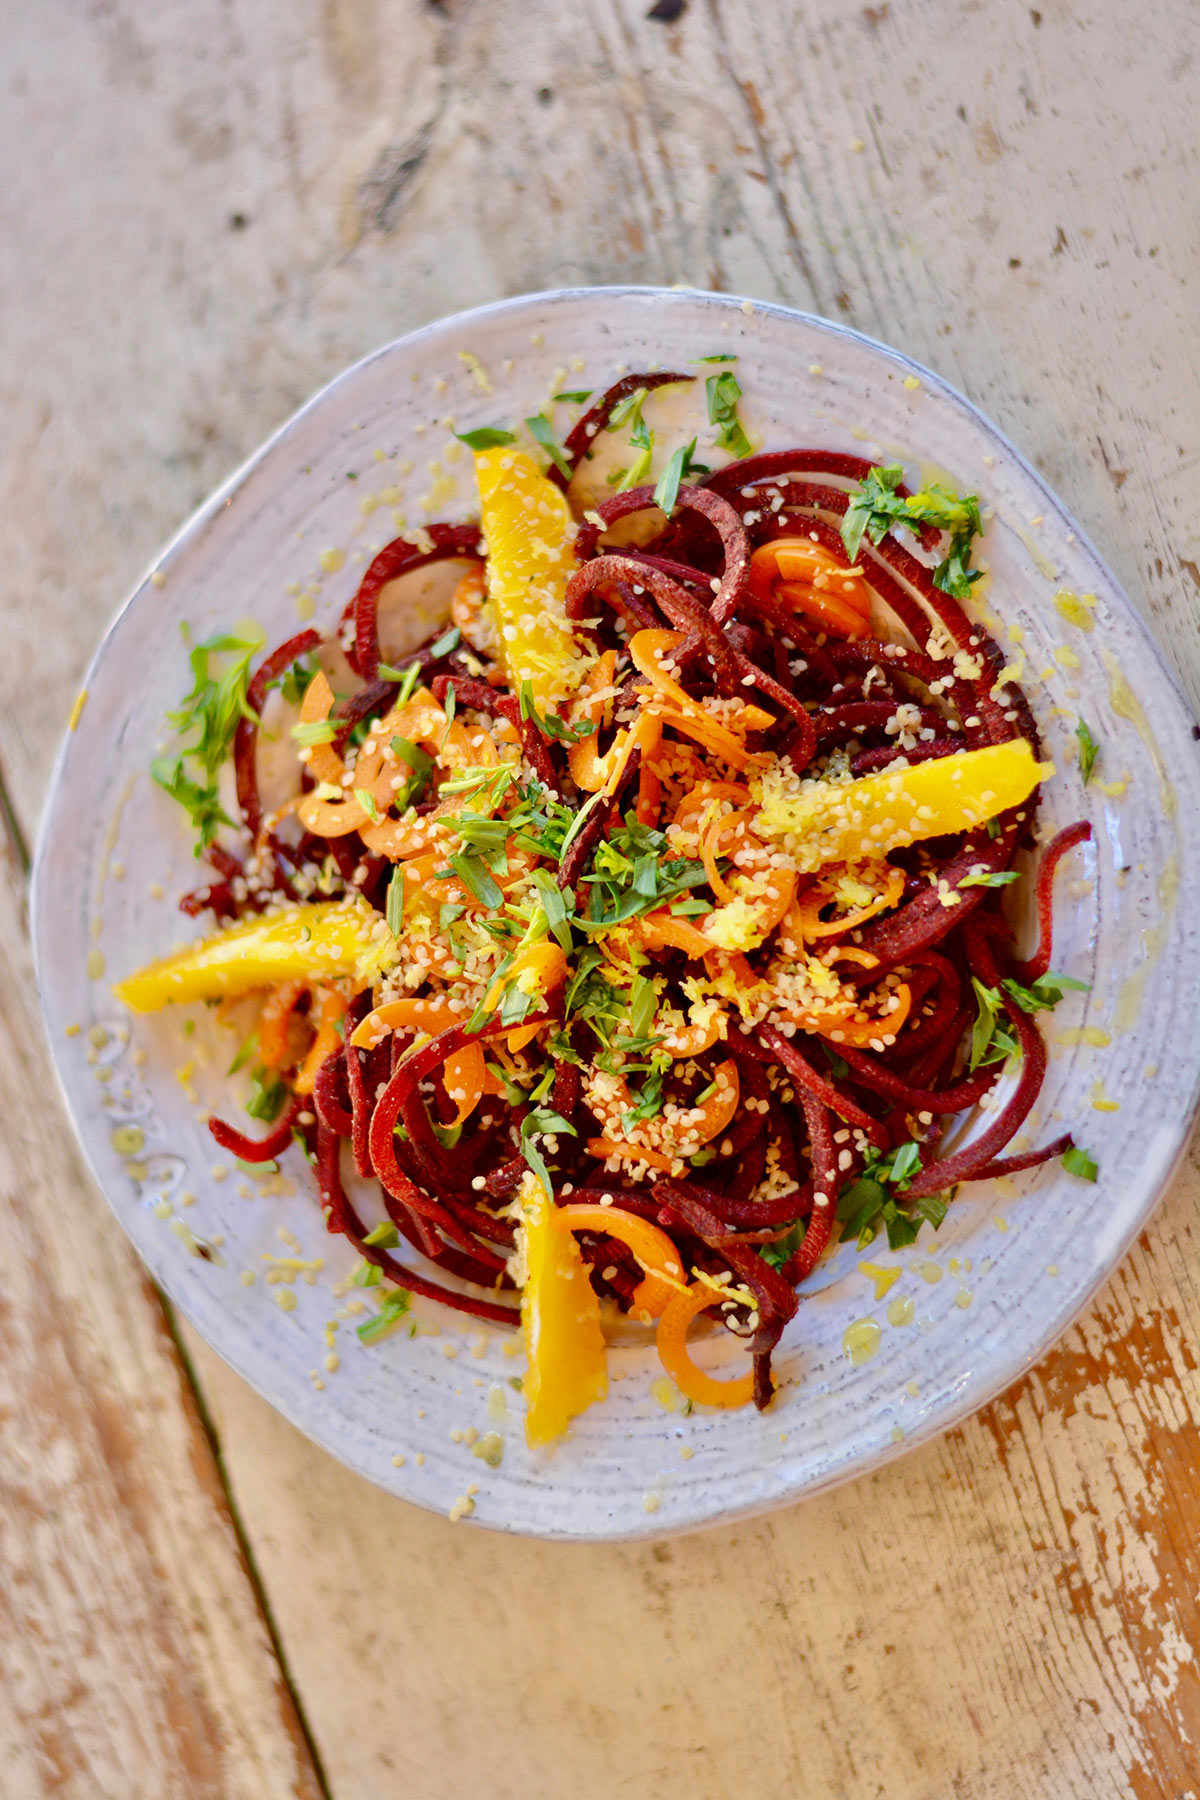 Summer Festivities – Beet and Carrot Noodle Salad